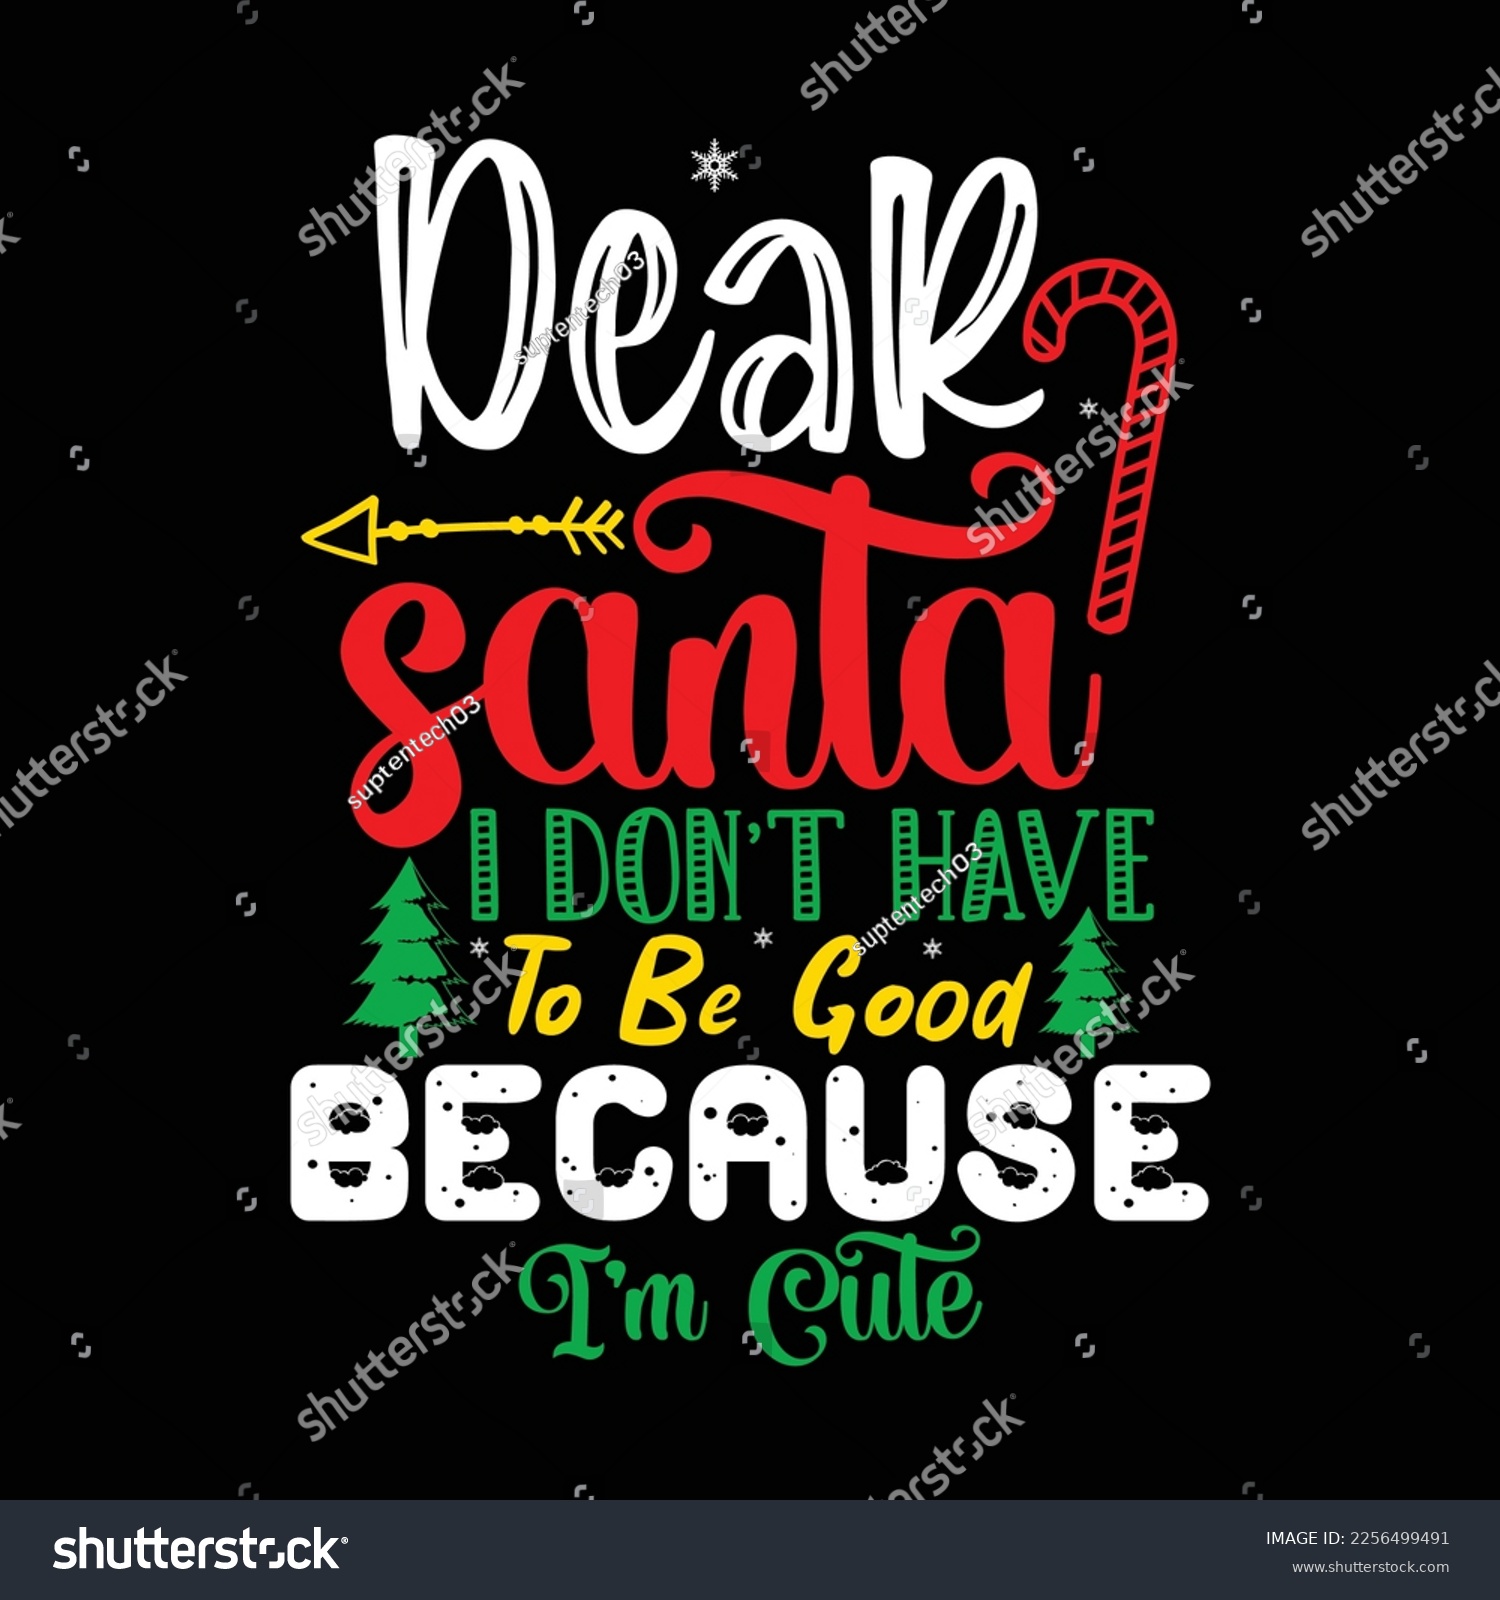 SVG of Dear Santa I Don't Have To Be Good Because I'm Cute,  Merry Christmas shirts Print Template, Xmas Ugly Snow Santa Clouse New Year Holiday Candy Santa Hat vector illustration for Christmas hand Lettere svg